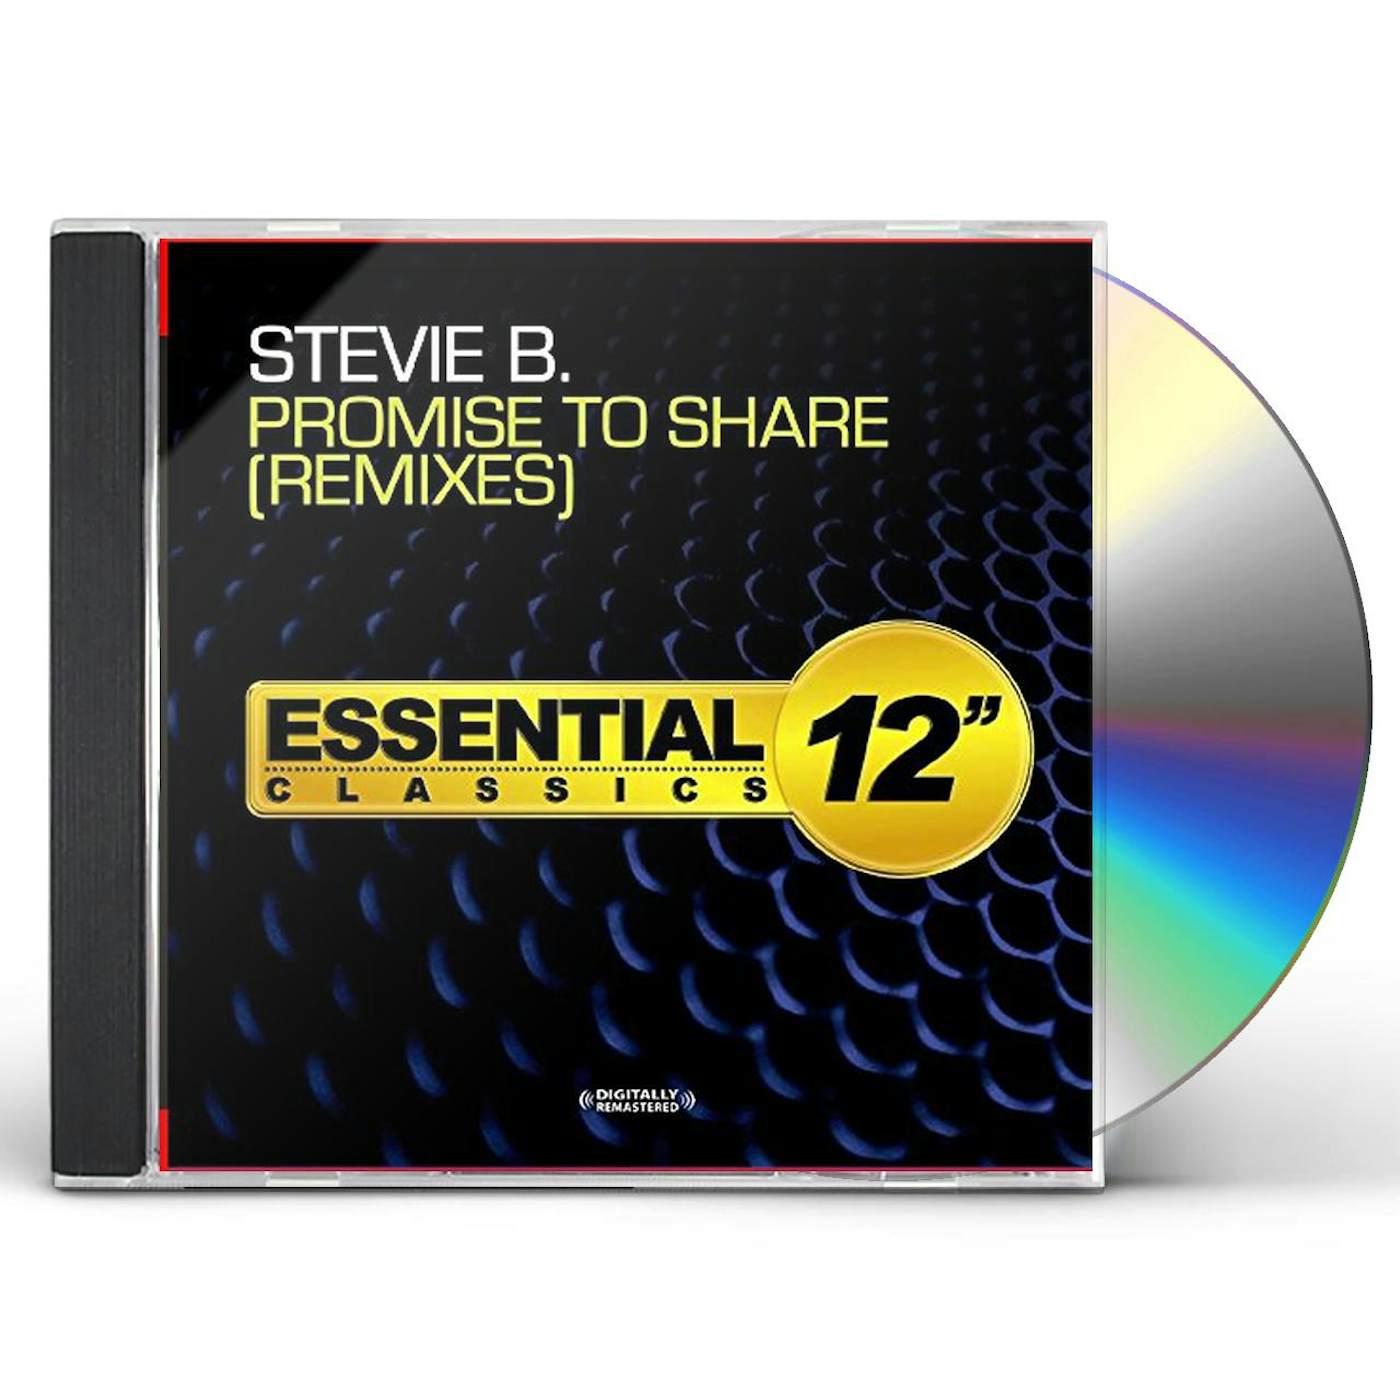 Stevie B PROMISE TO SHARE - REMIXES CD